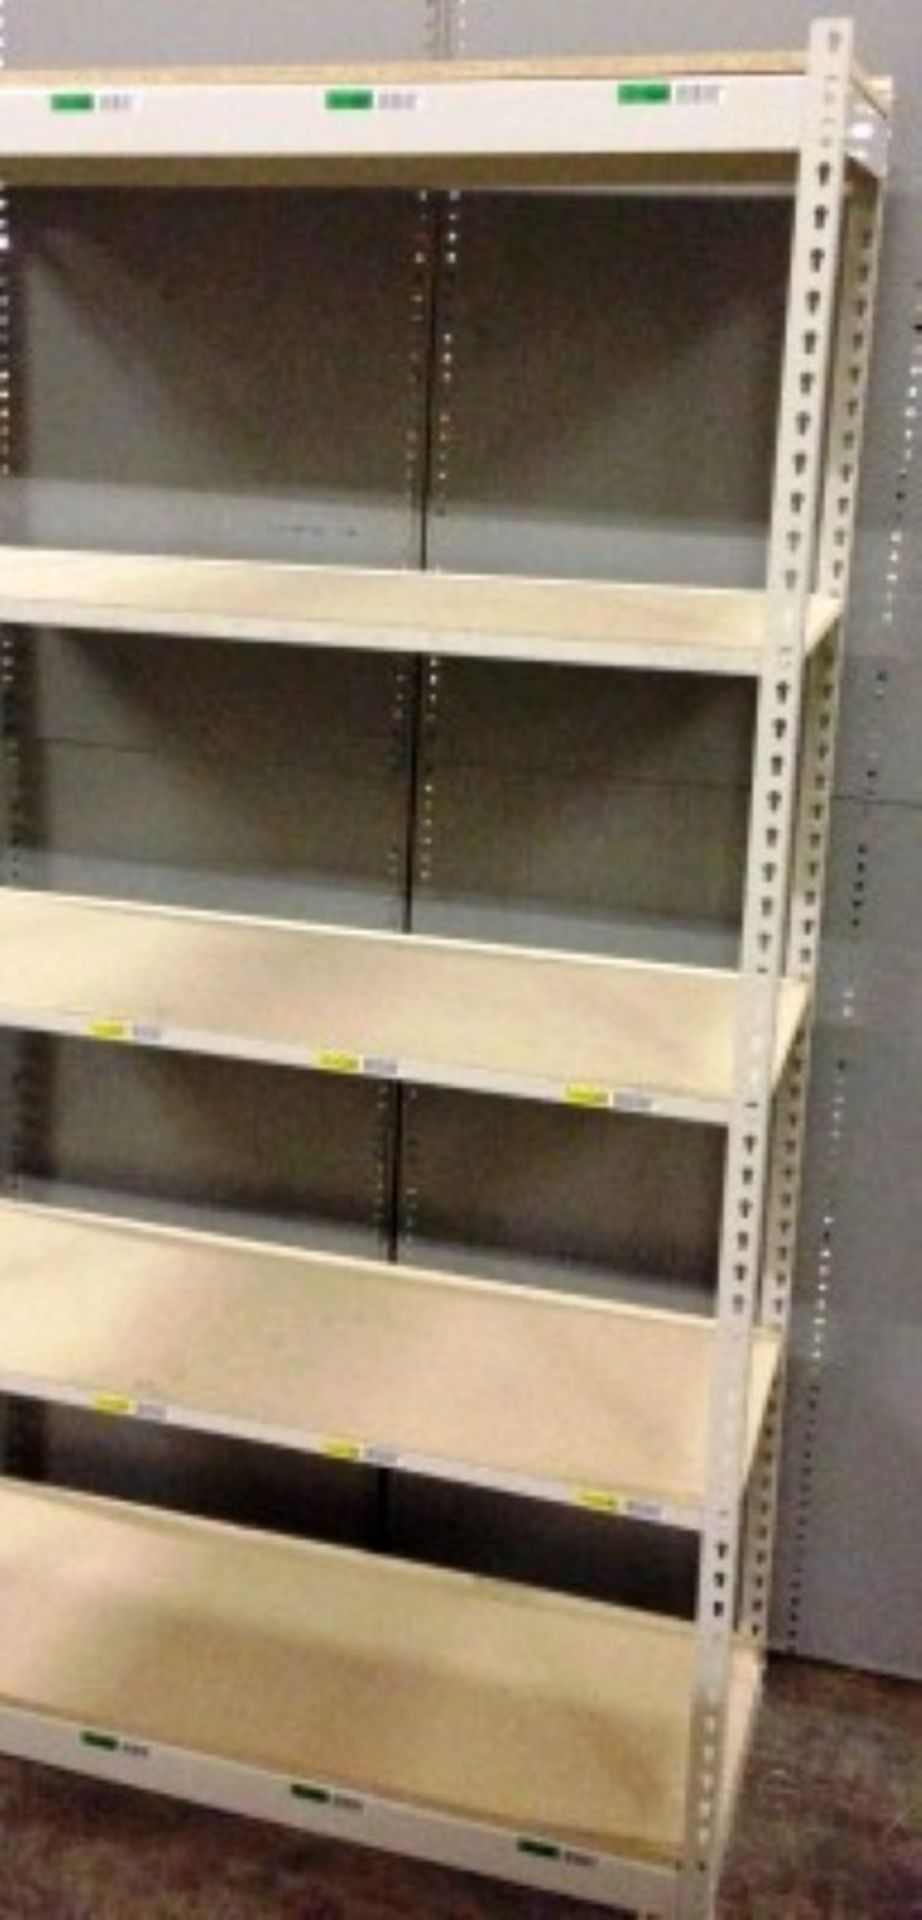 ONE LOT OF 10 SECTIONS OF RIVETIER INDUSTRIAL SHELVING,  EACH SIZE 18"D X 48"W X 84"H, COLOR: - Image 3 of 4